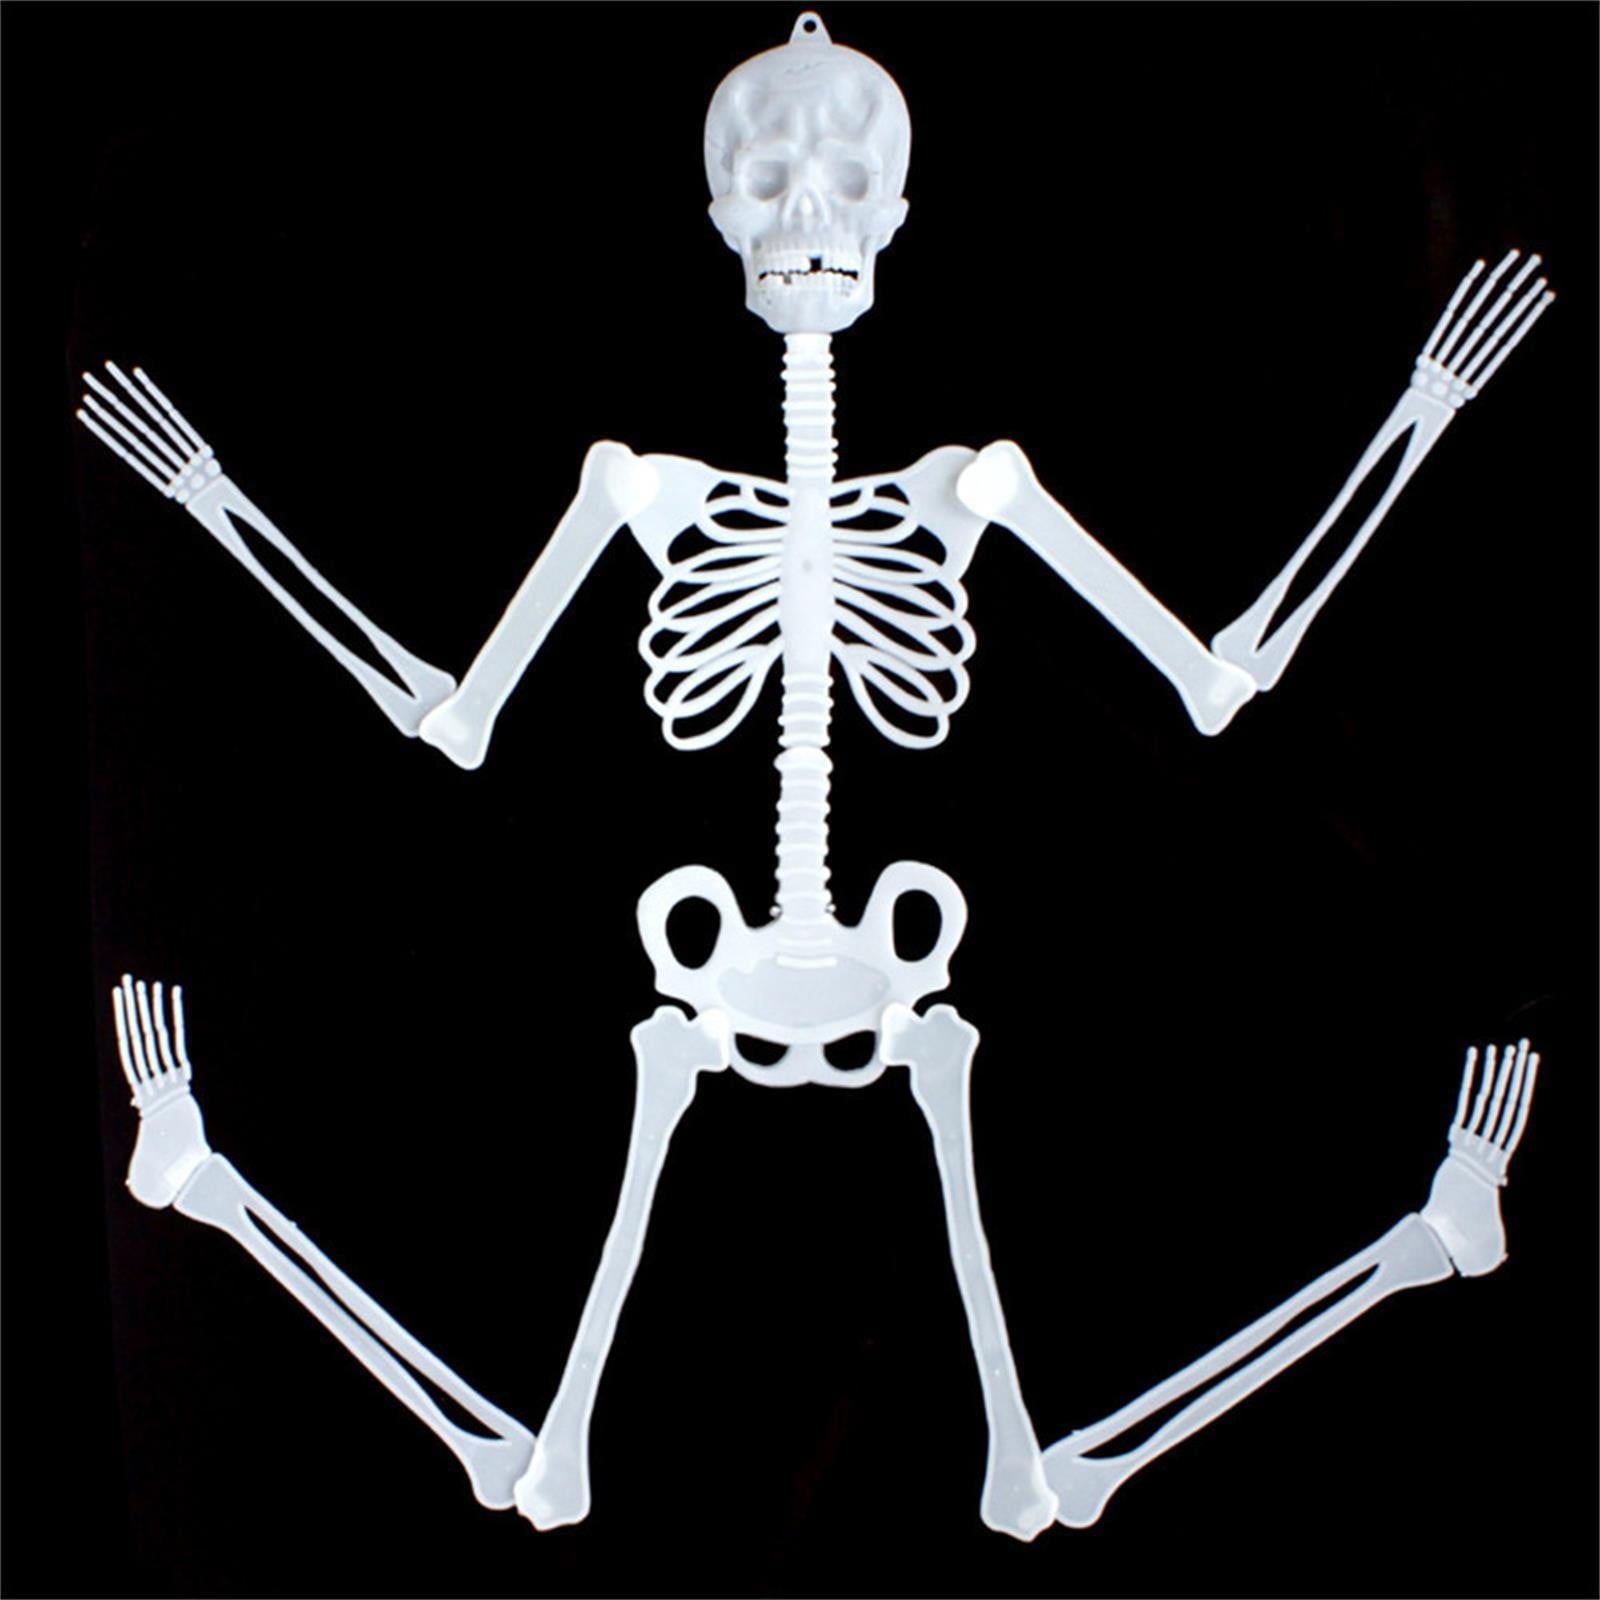 Details about   90cm Luminous Skull Skeleton Halloween Party  Scary Props Outdoor Hanging Decor 